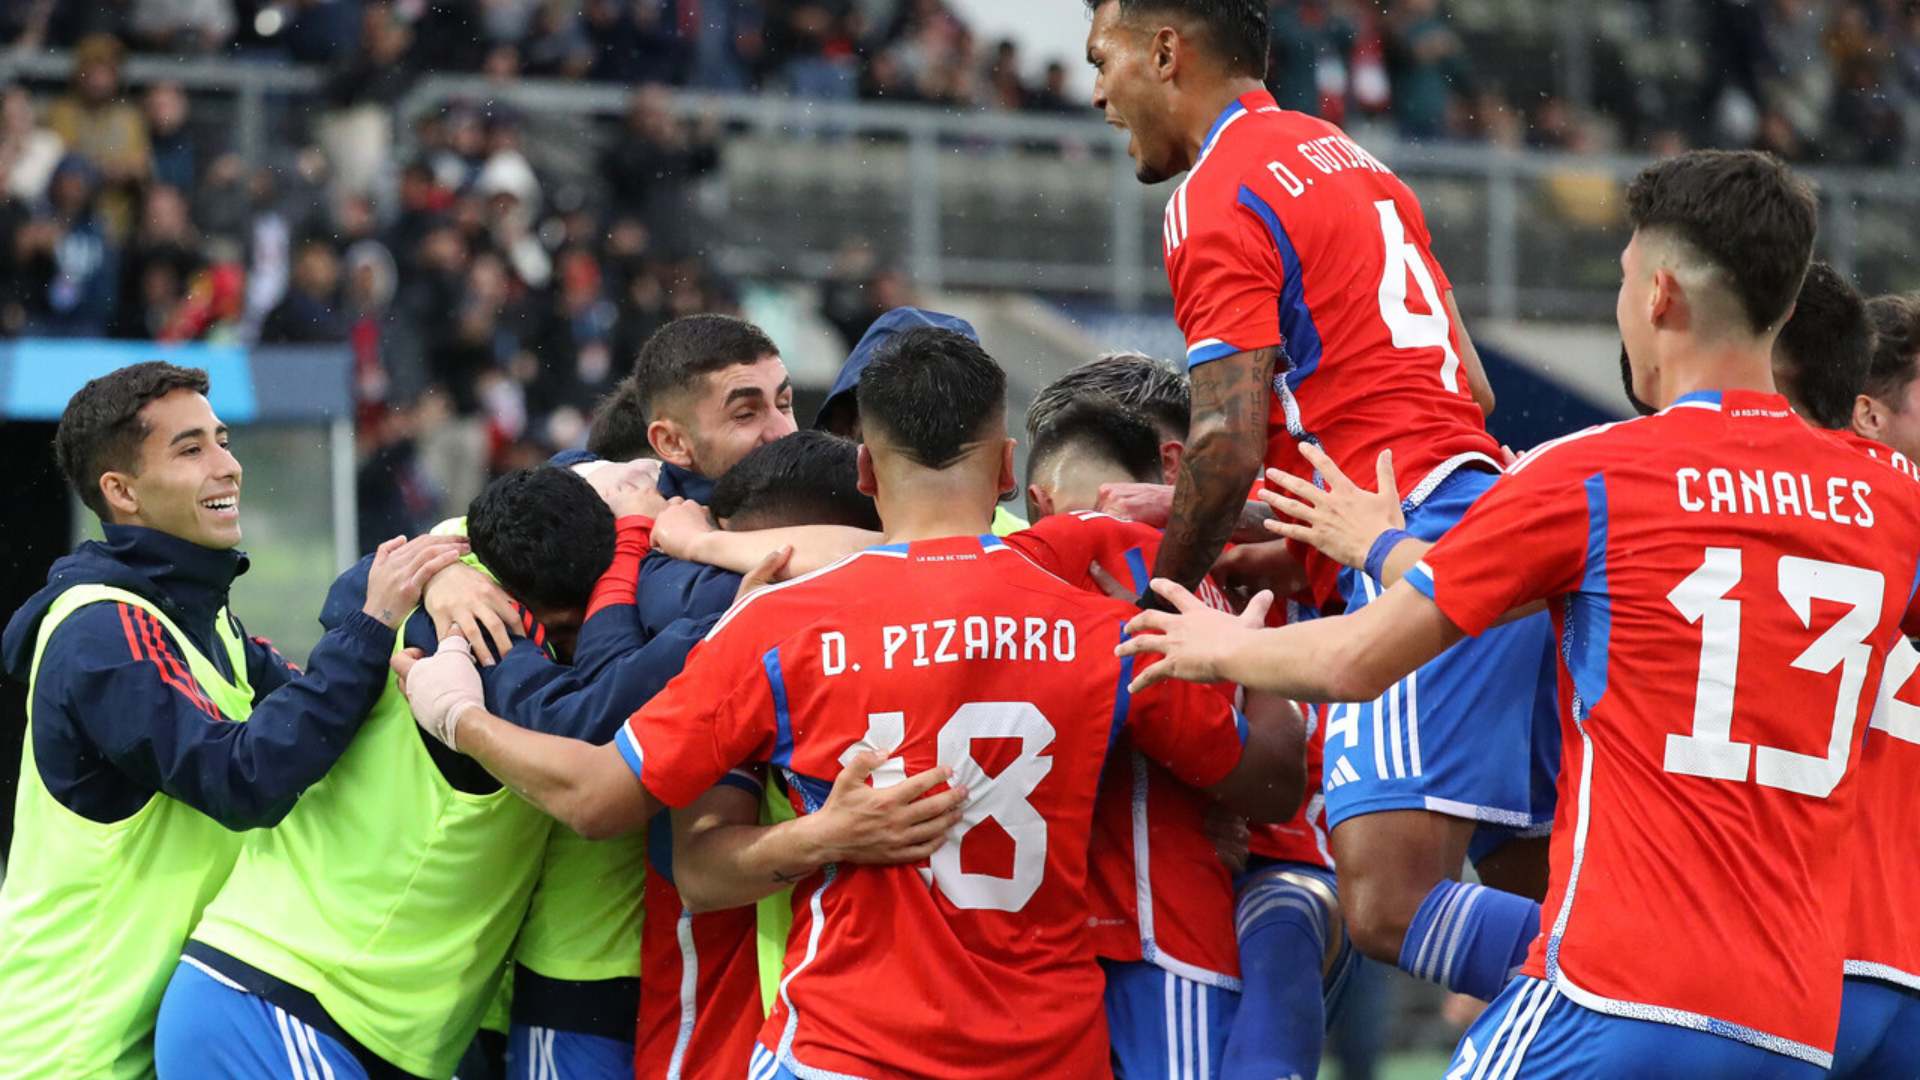 Chile defeats the United States and will compete for gold in male's football